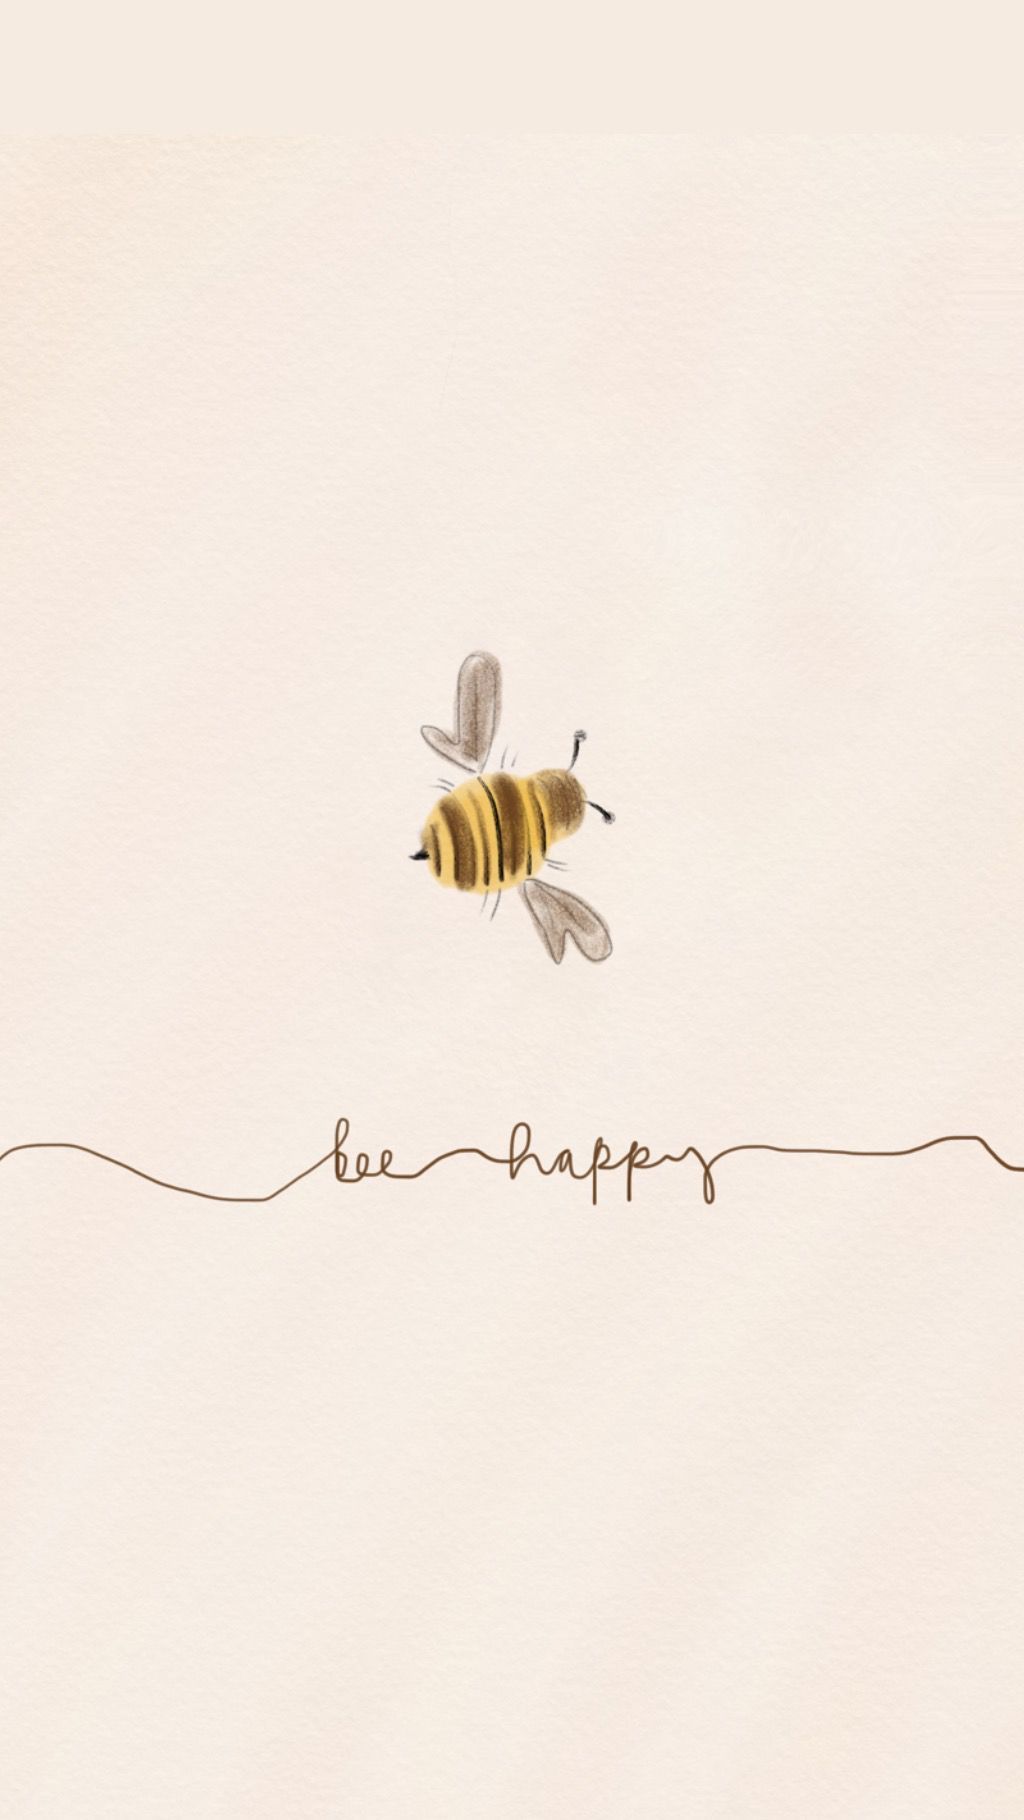 A watercolor bee flying over a handwritten phrase 